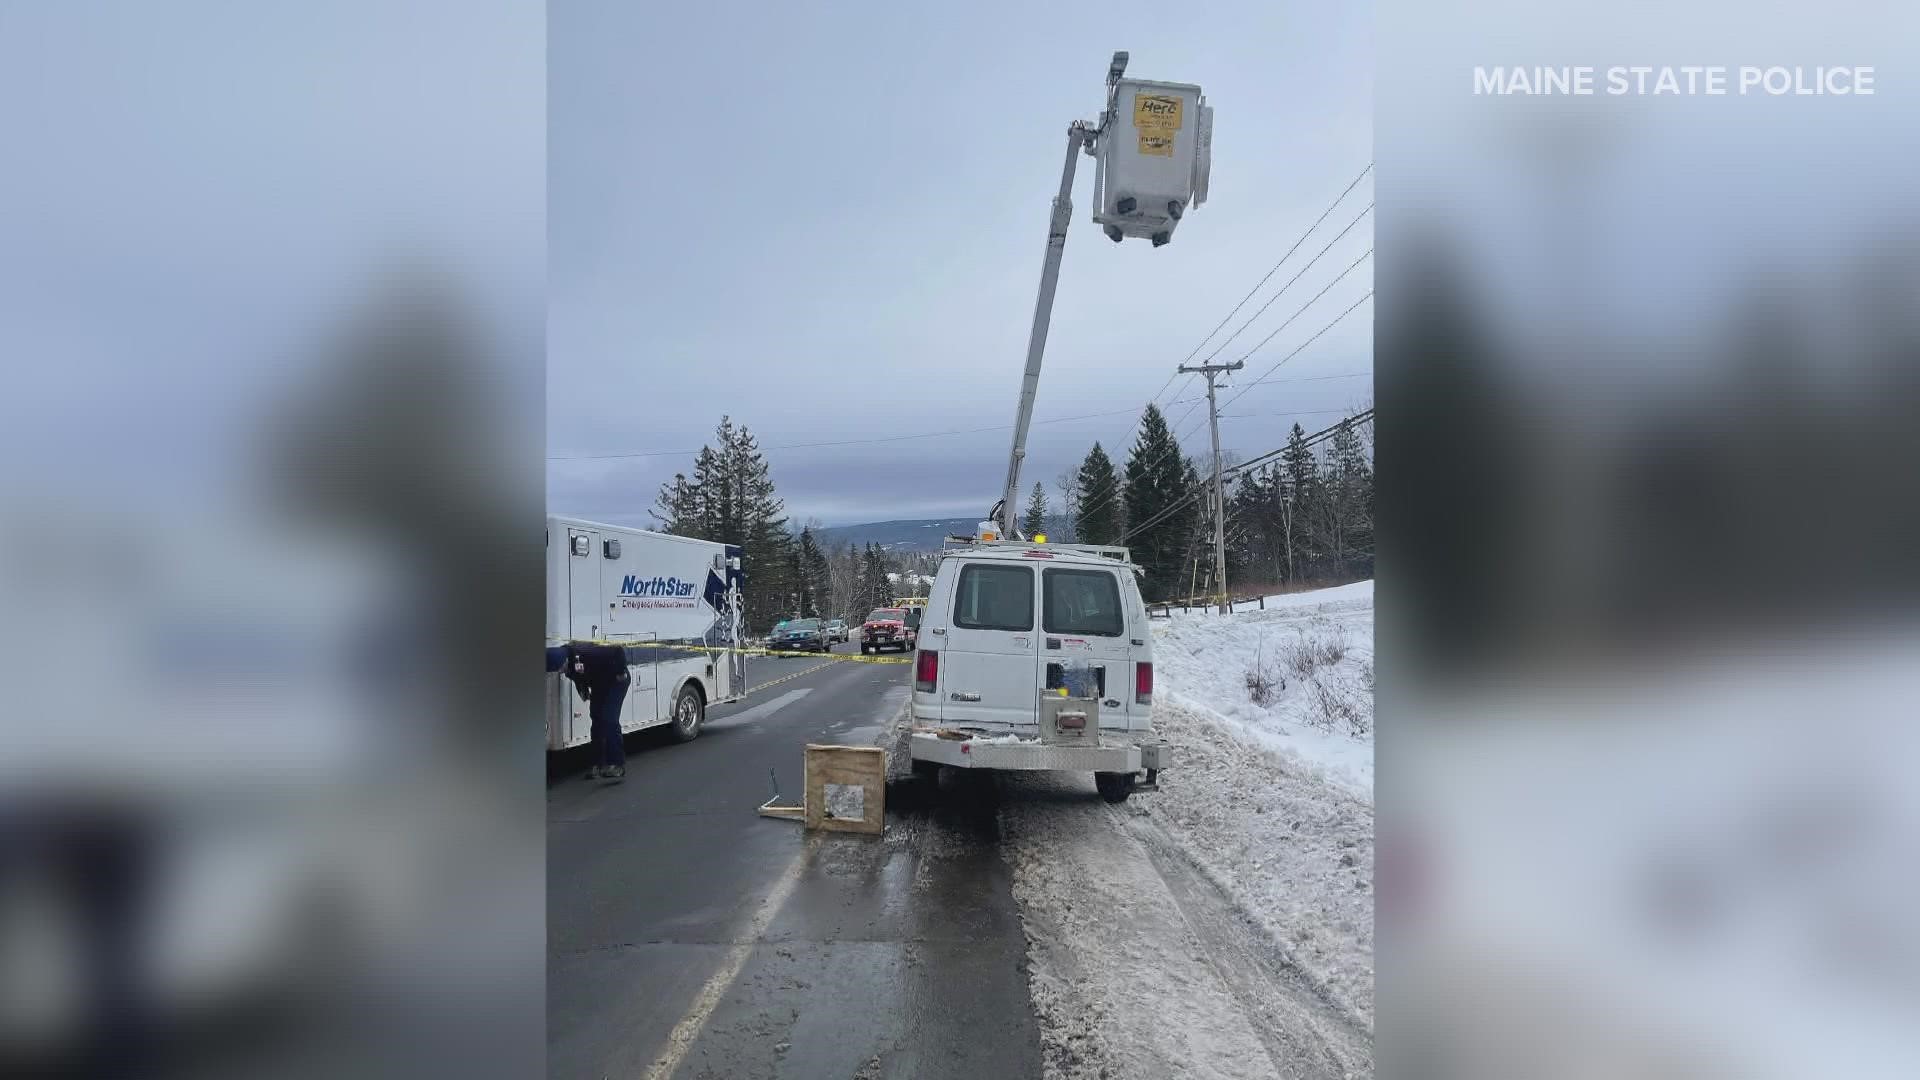 The bucket struck a set of utility wires suspended by utility poles across the roadway, according to a news release.